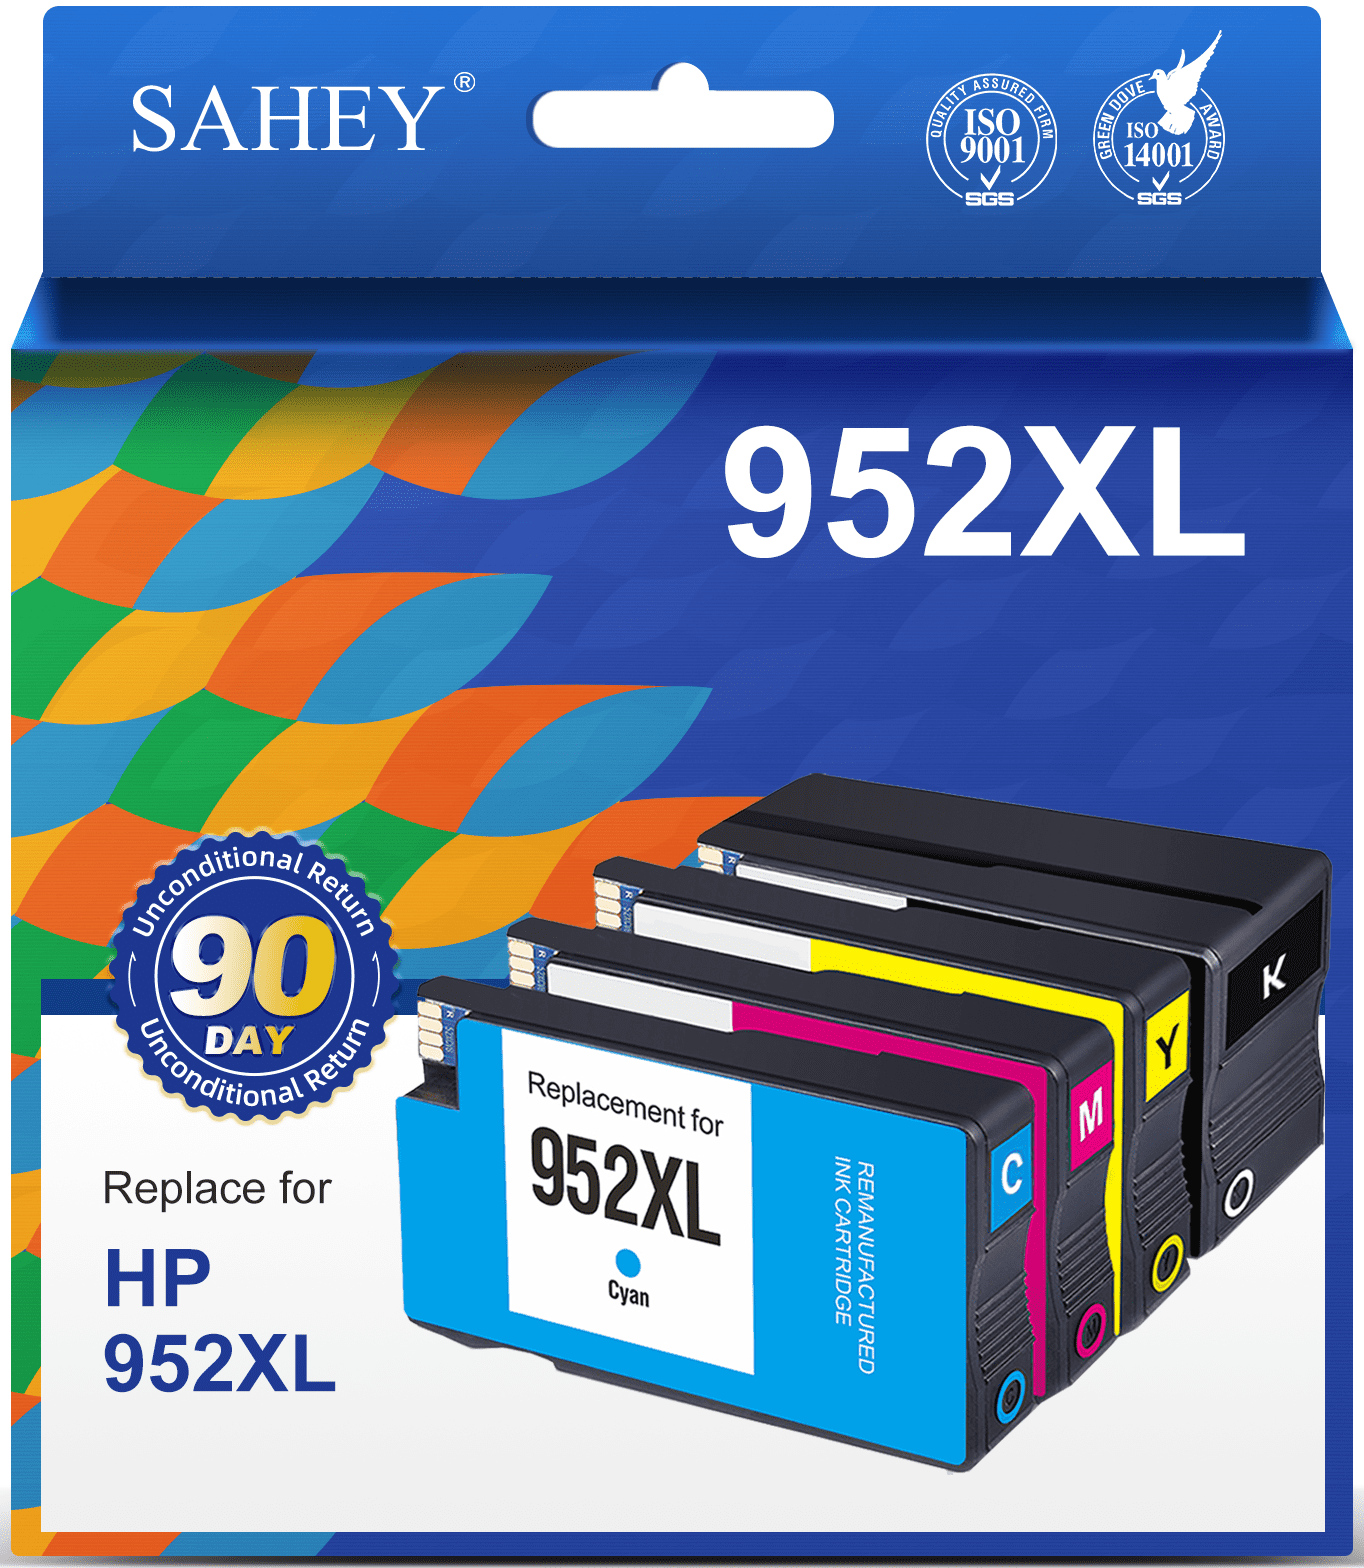 952XL Ink for HP 952 Ink Cartridge for HP 952 Ink Color Black Combo Pack  for HP 952 Printer Ink High Yield for OfficeJet Pro 8720 7740 8740 7720  8715